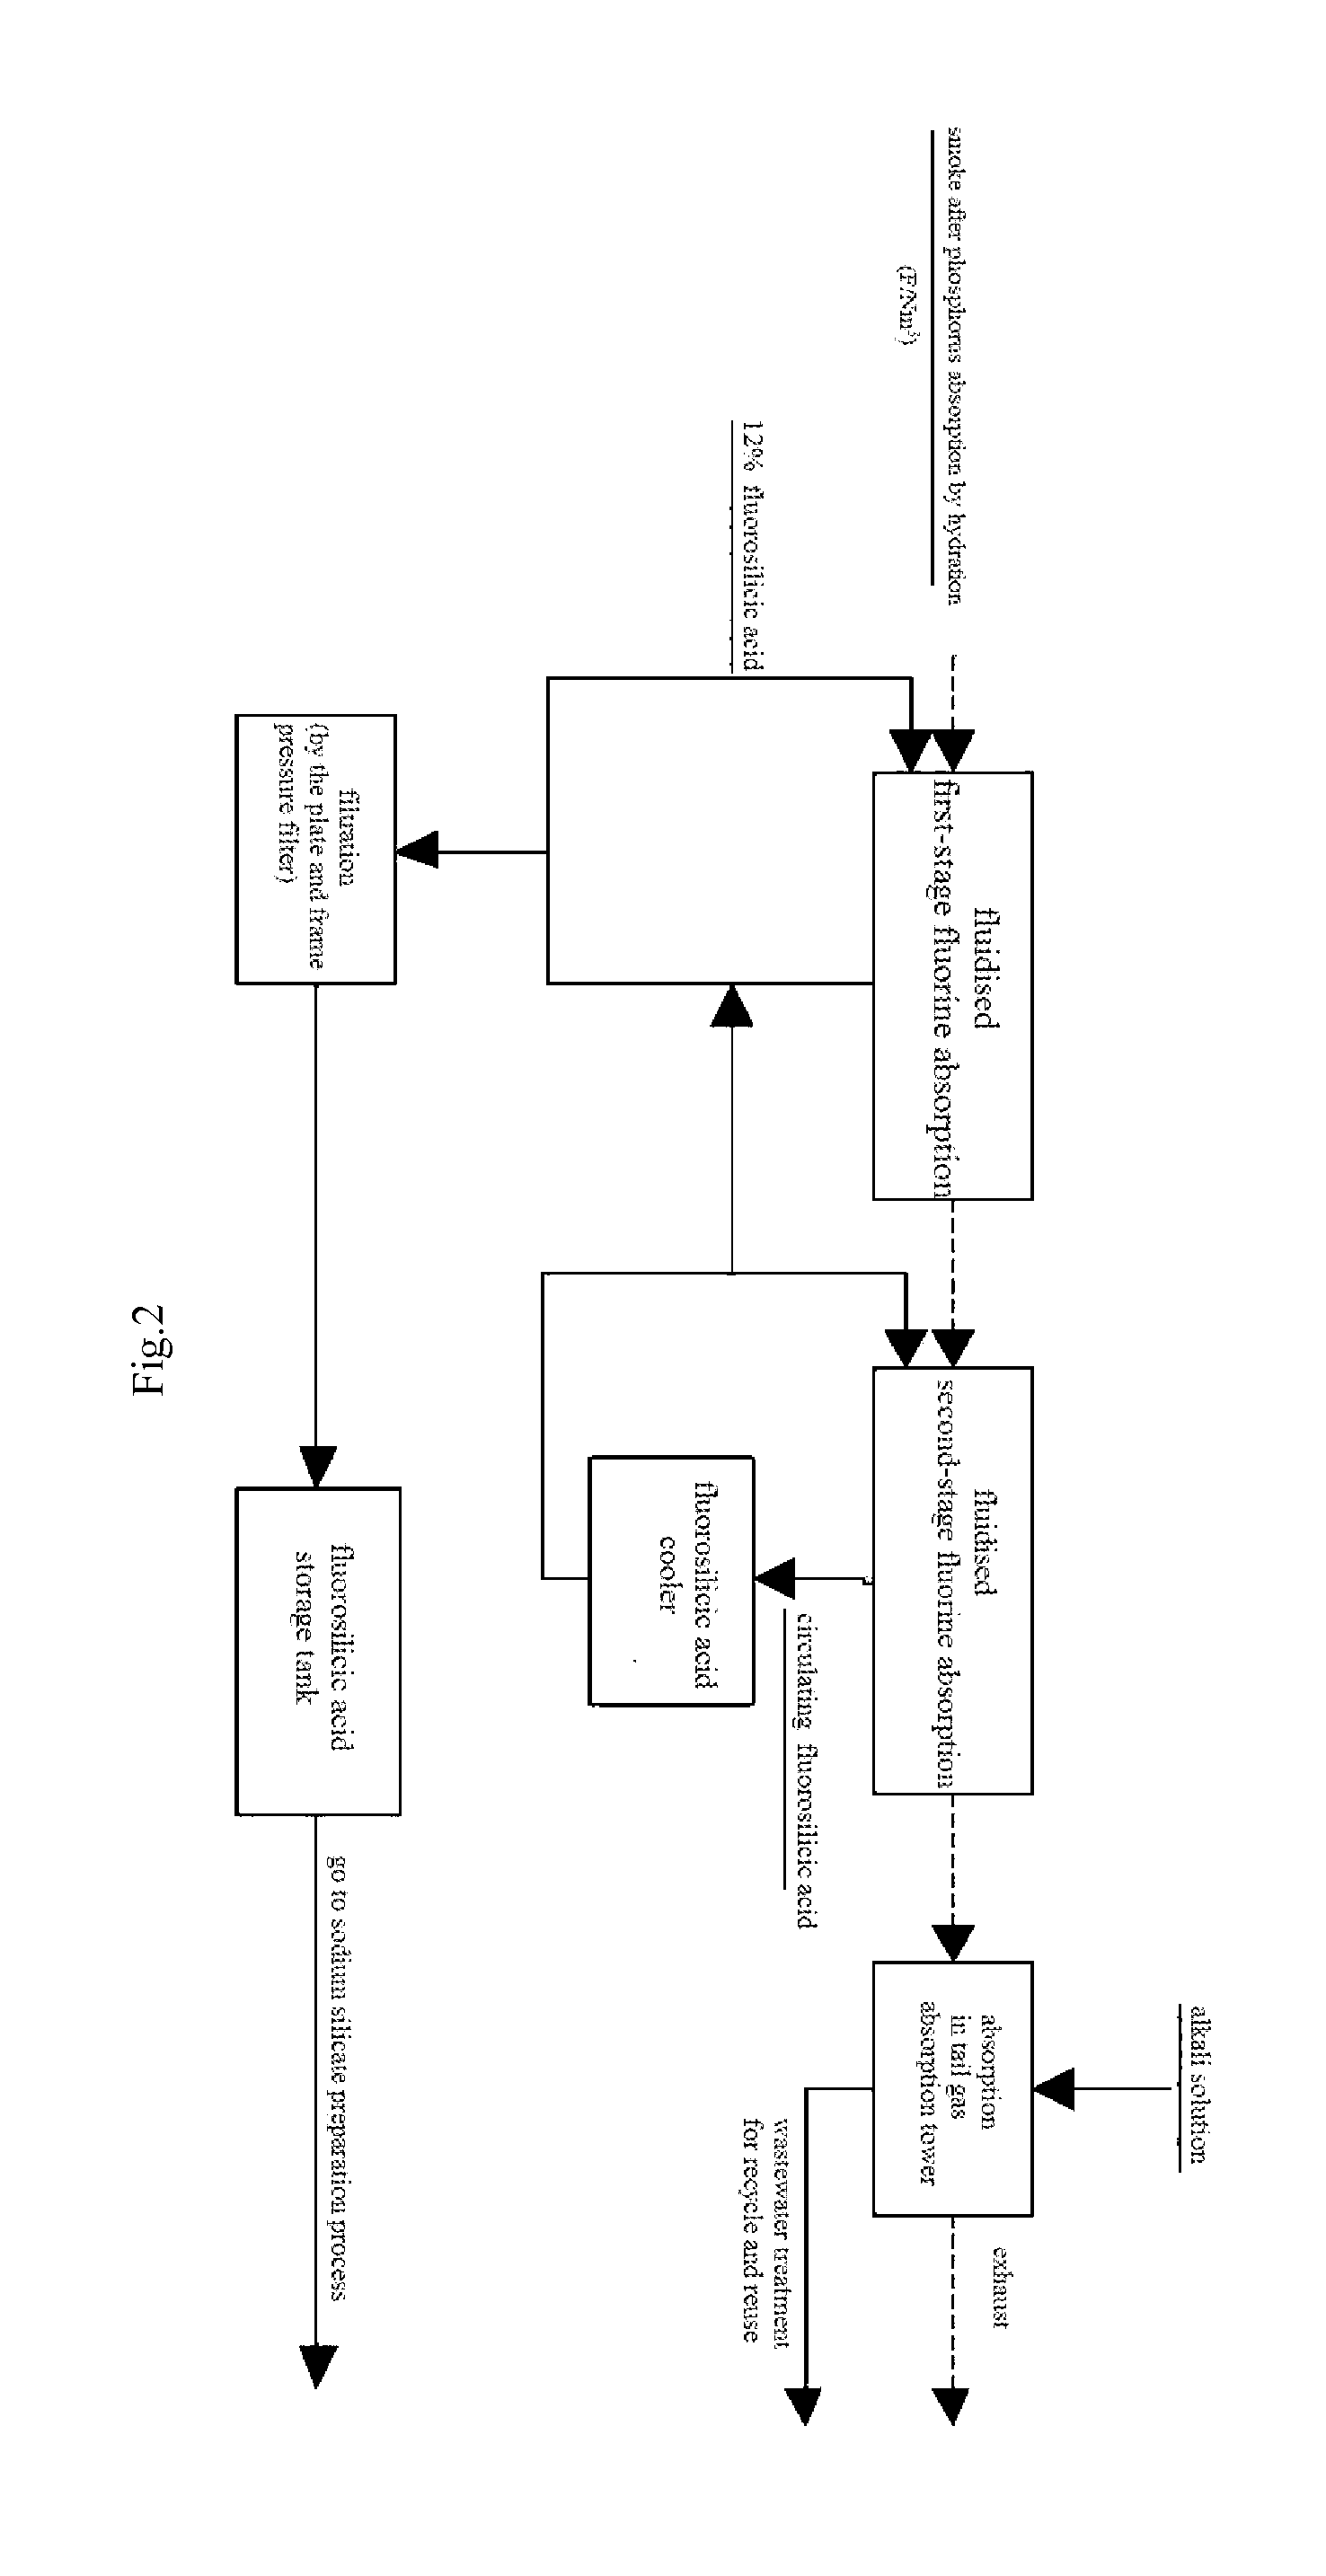 Device and process for fluorine recovery from smoke after phosphorus absorption by hydration in kiln process for production of phosphoric acid